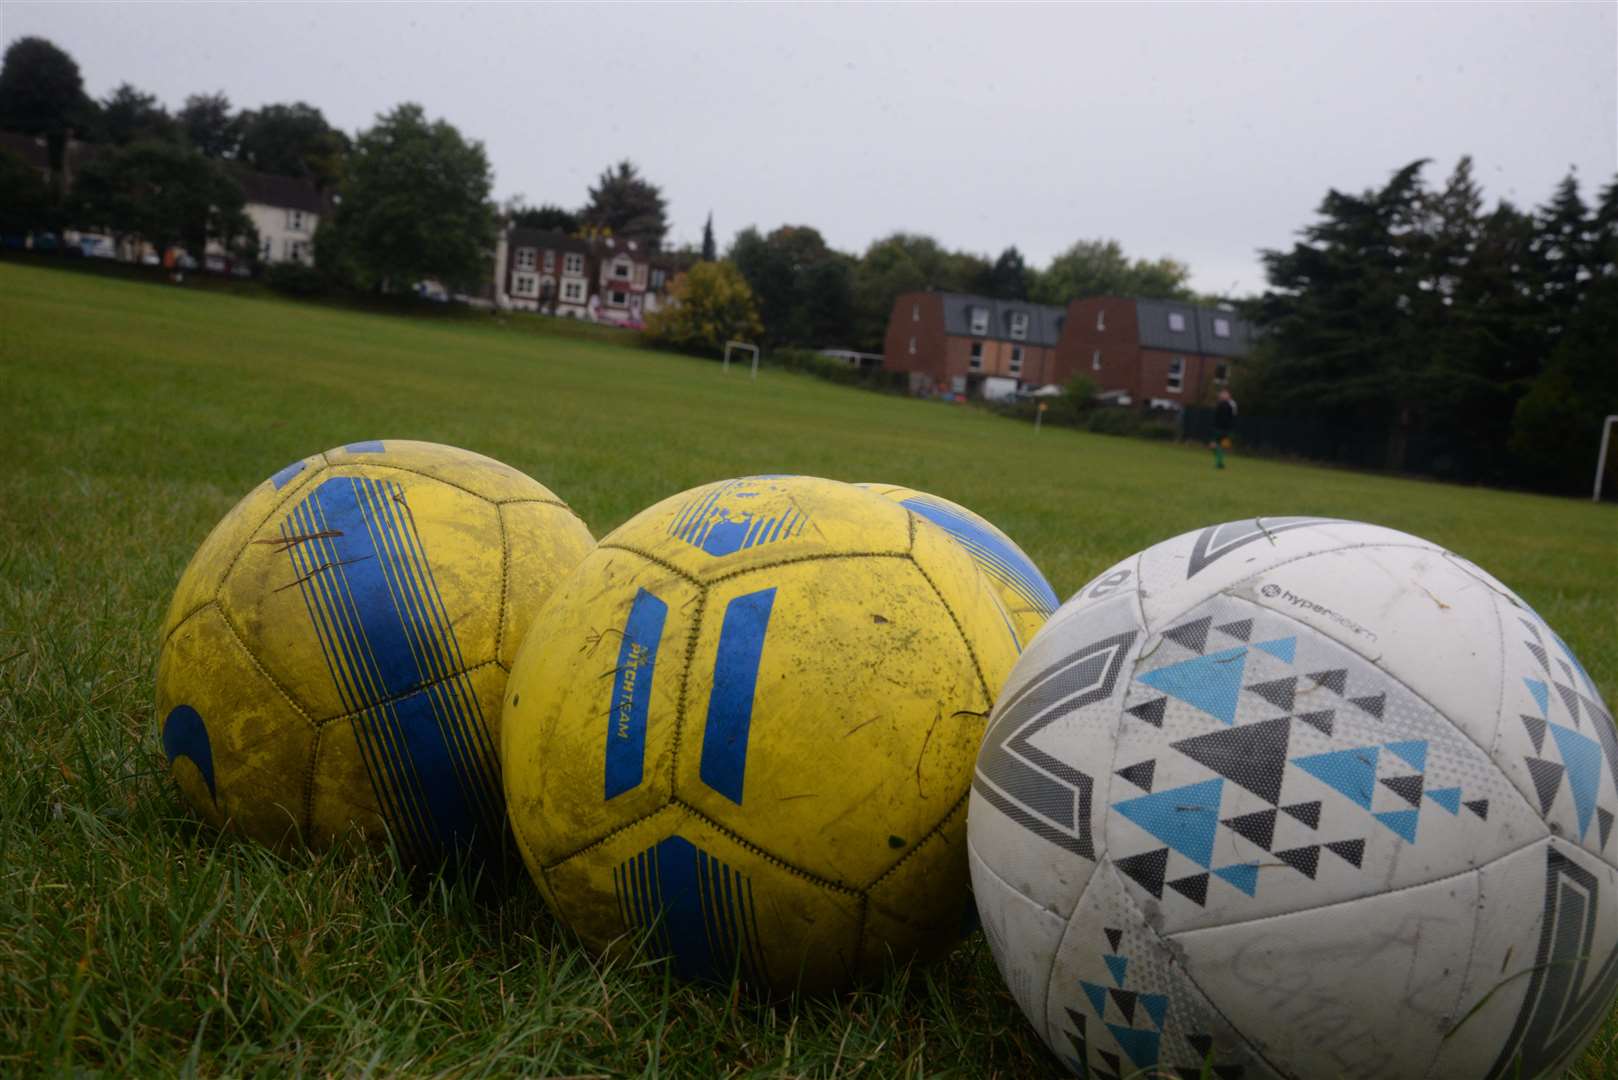 Lengthy ban from the FA for Sunday League goalkeeper